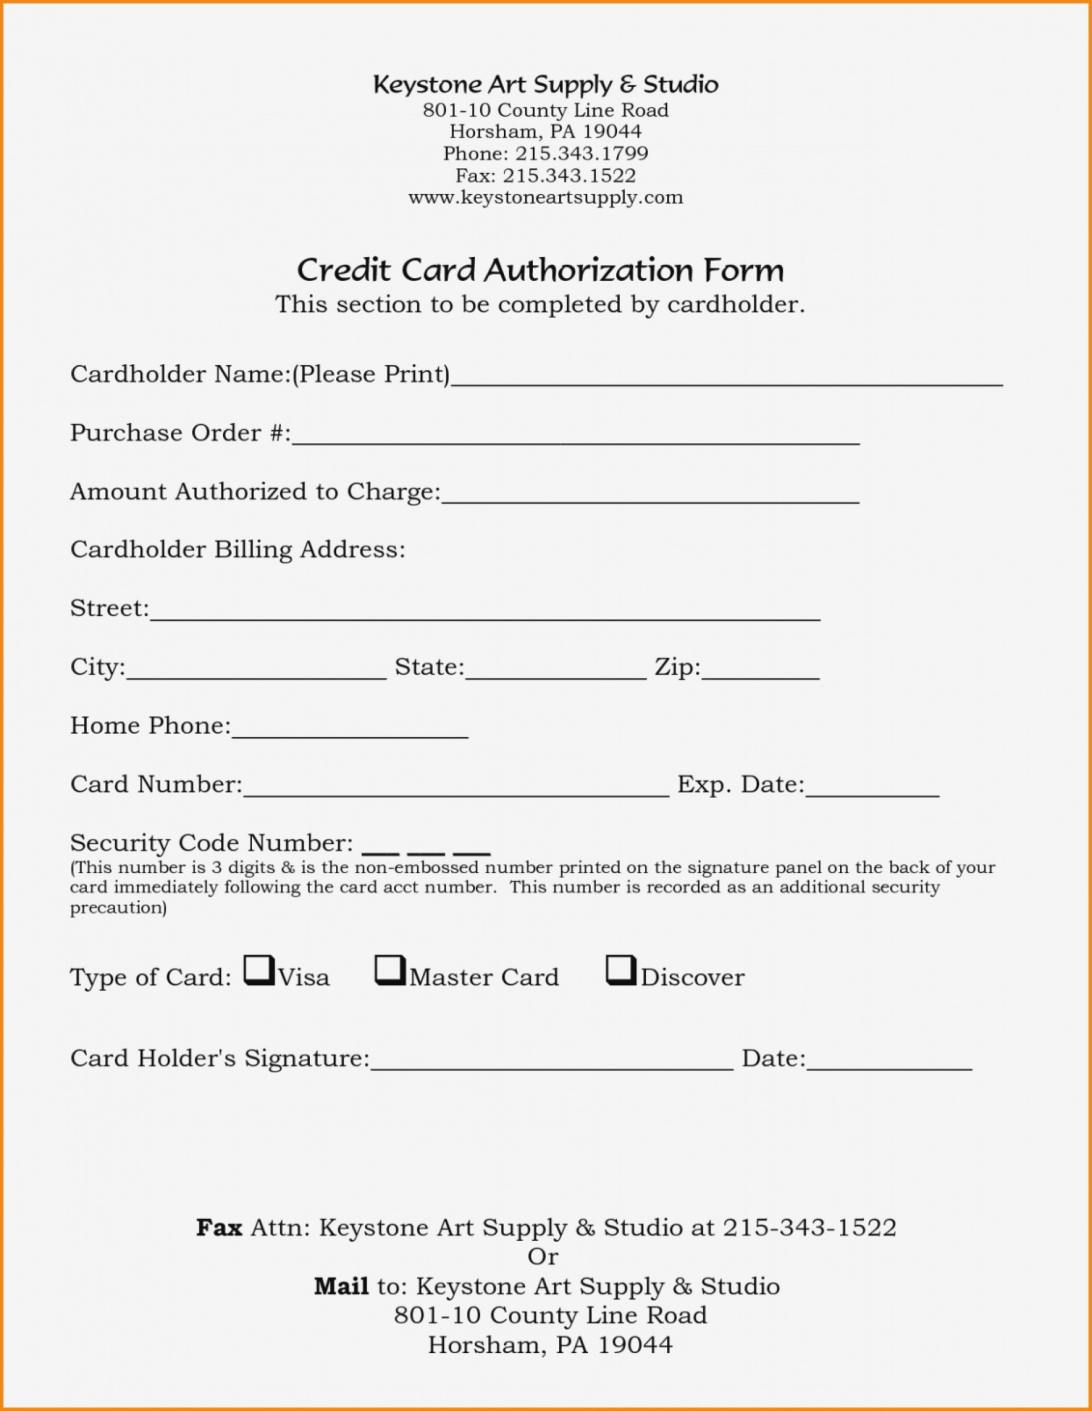 Credit Card Authorization Form Template 41 Jet Airways Uk With Regard To Credit Card Authorization Form Template Word